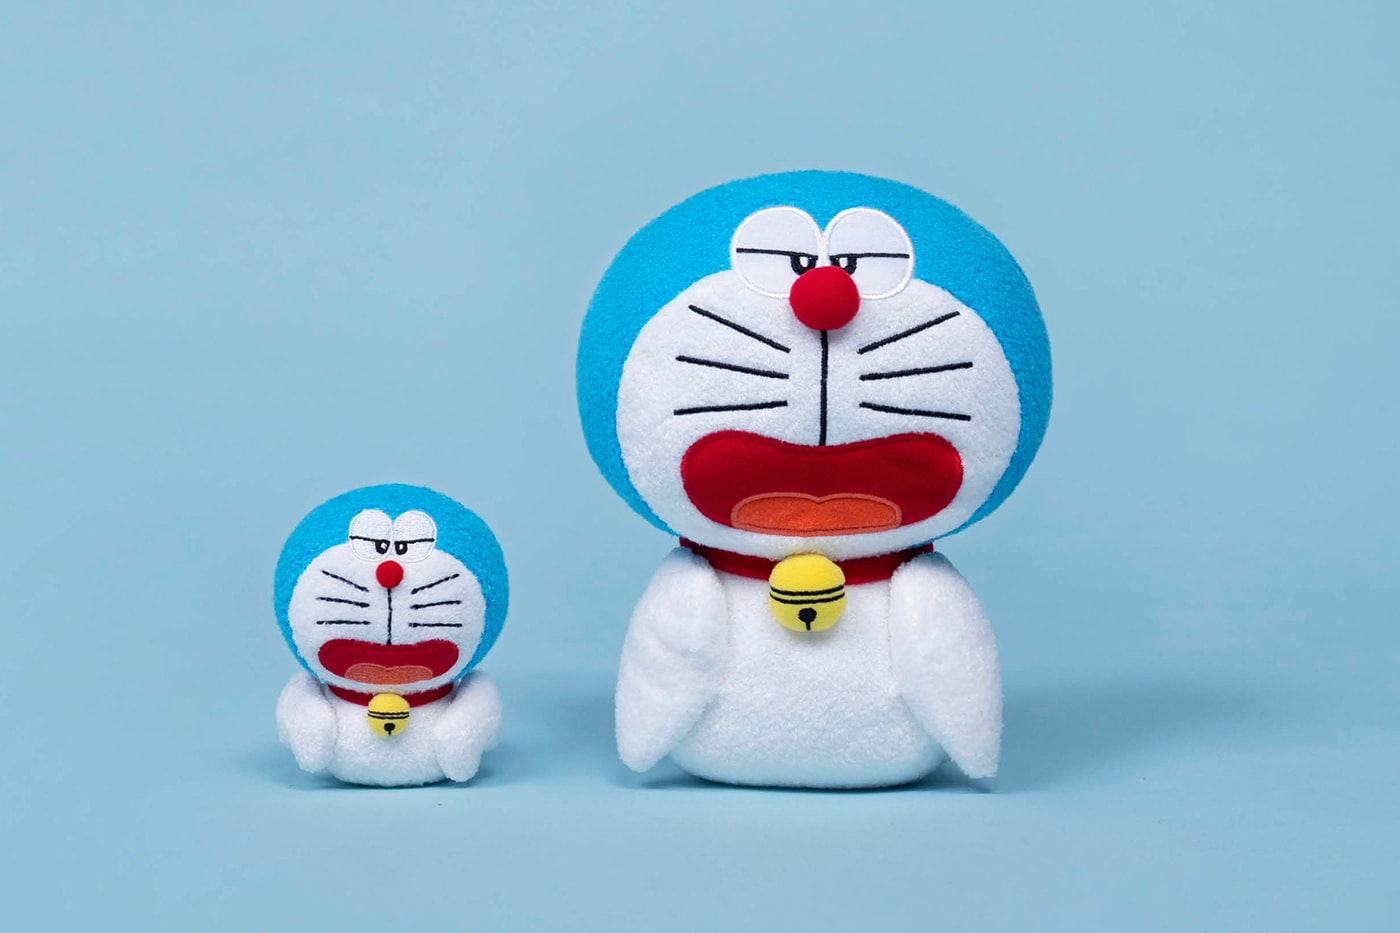 doraemon 50th anniversary allrightsreserved collaboration plush toys dolls home accessories t-shirts keychains